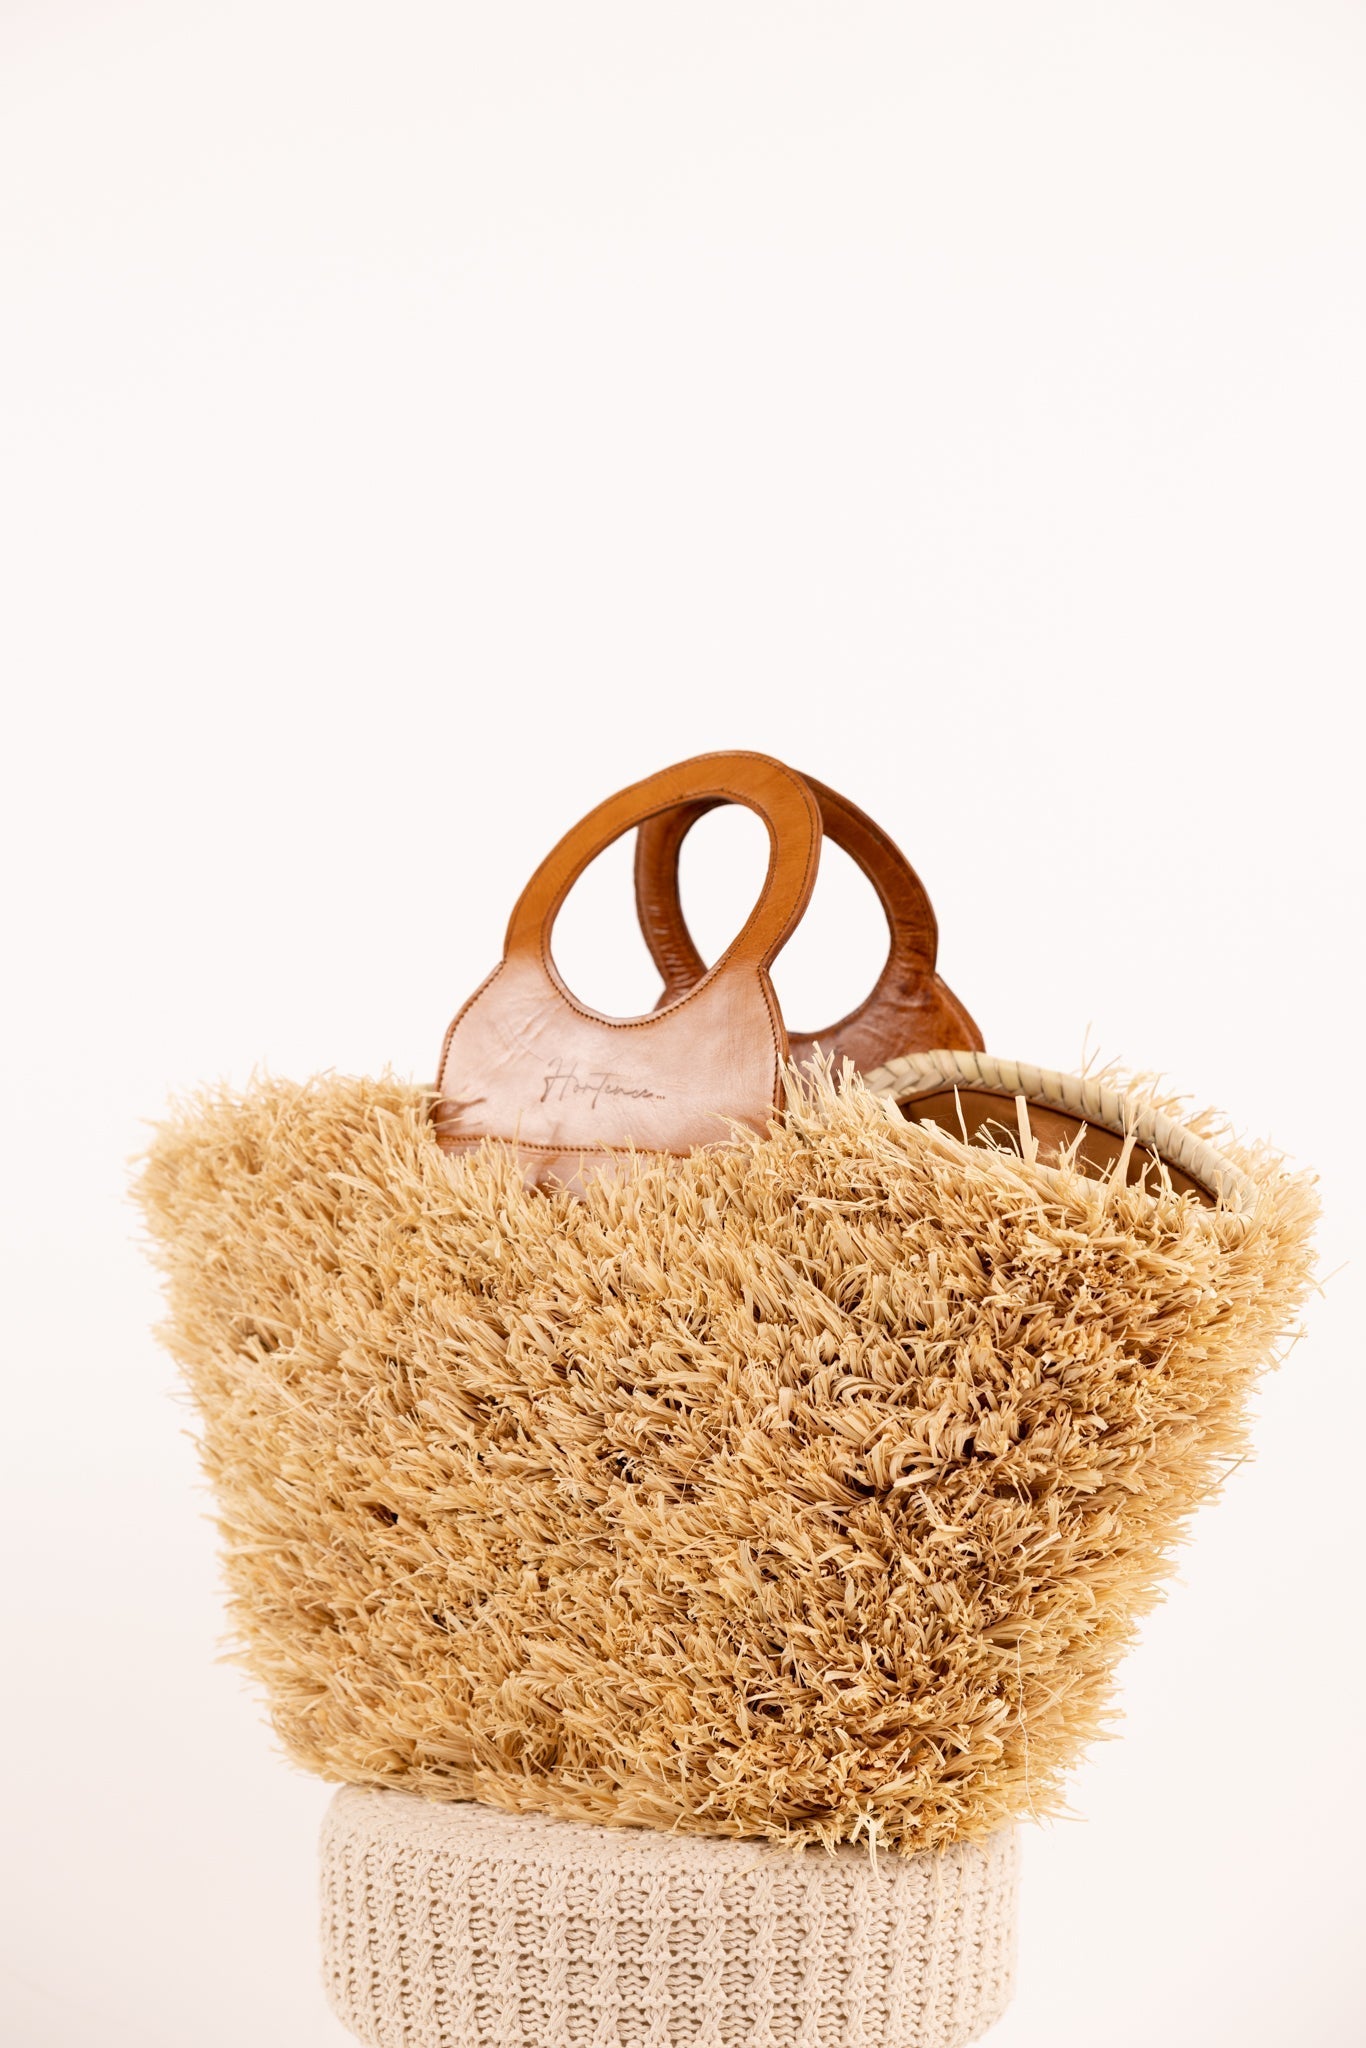 ROMY bag - Natural raffia and leather - Cognac